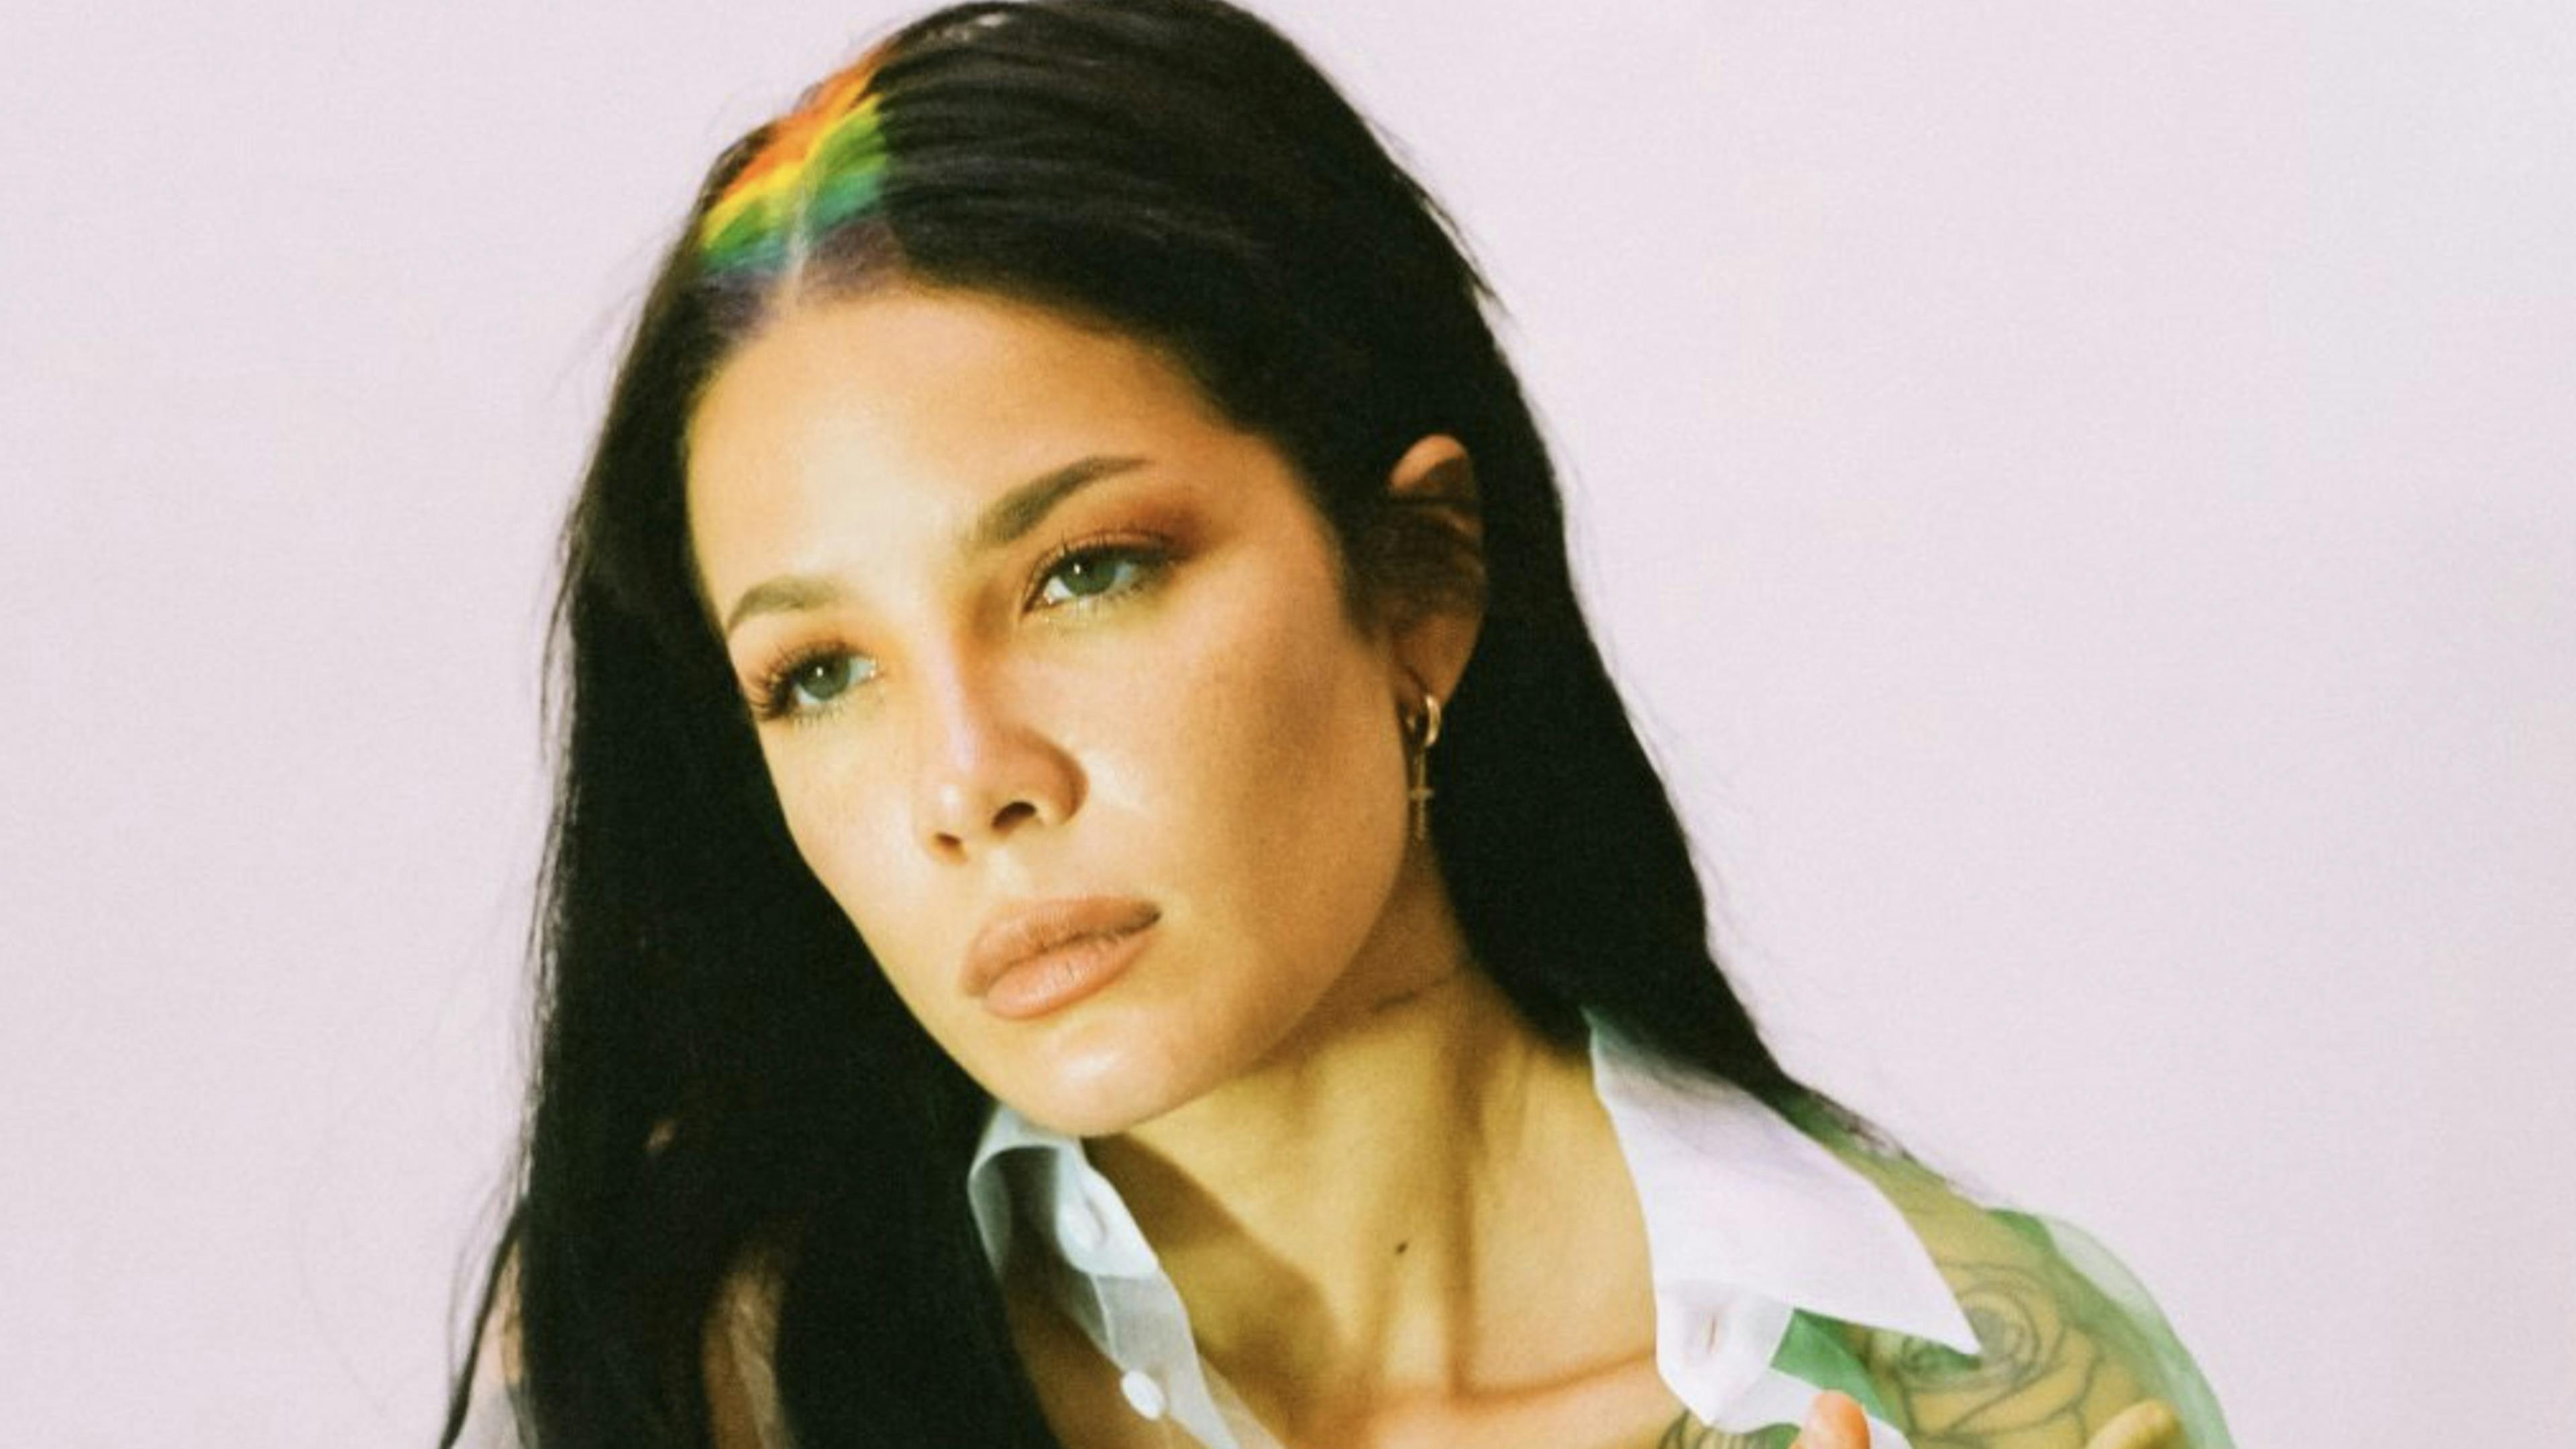 Halsey is working with Trent Reznor and Atticus Ross on their new album